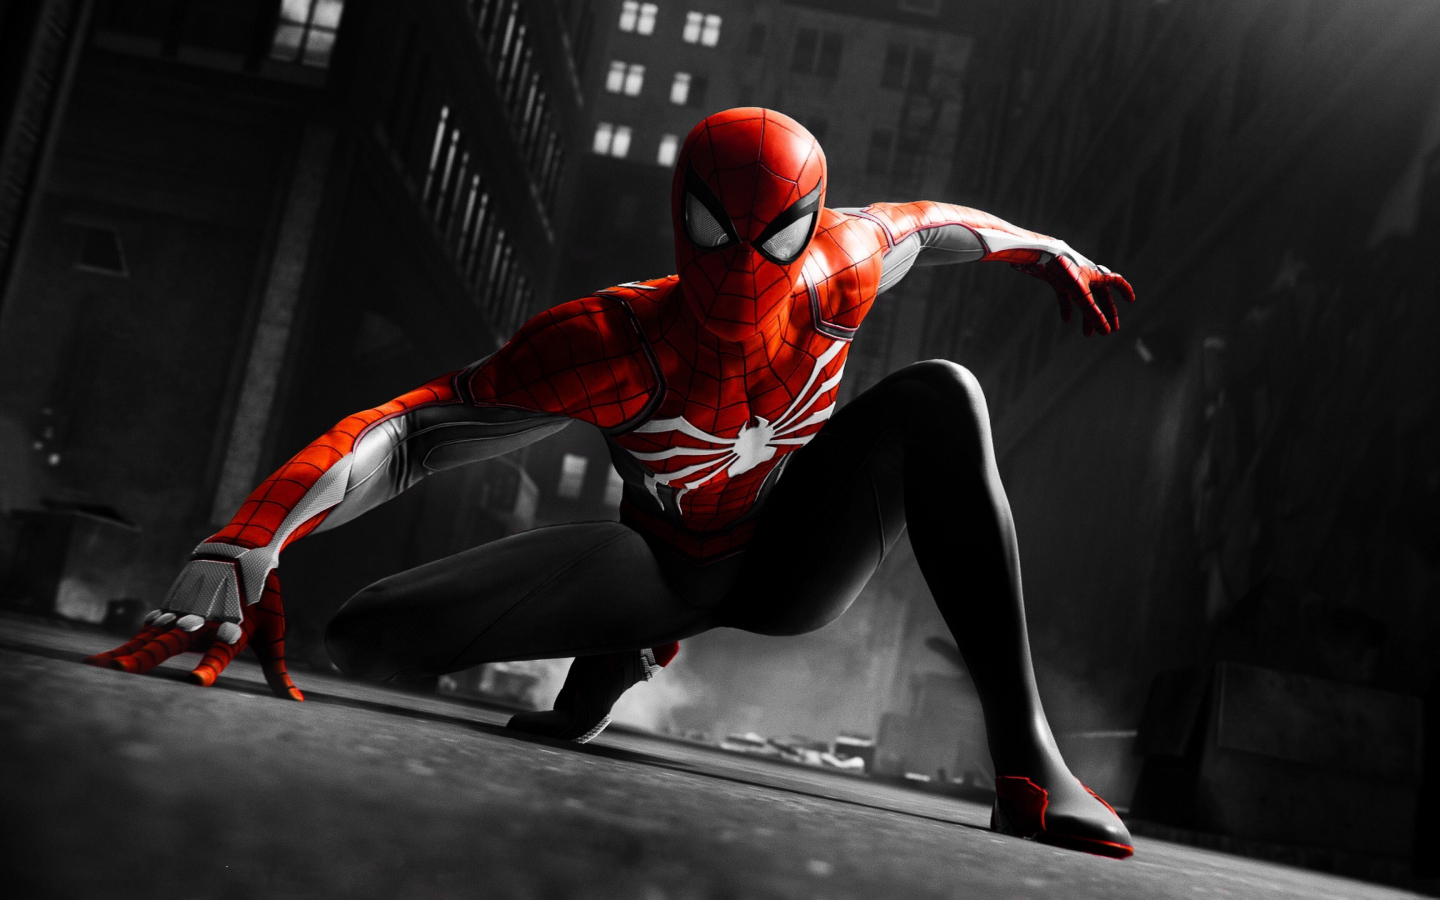 Download wallpaper 1440x900 black and red, suit, spider-man, video game,  1440x900 widescreen 16:10 hd background, 16142